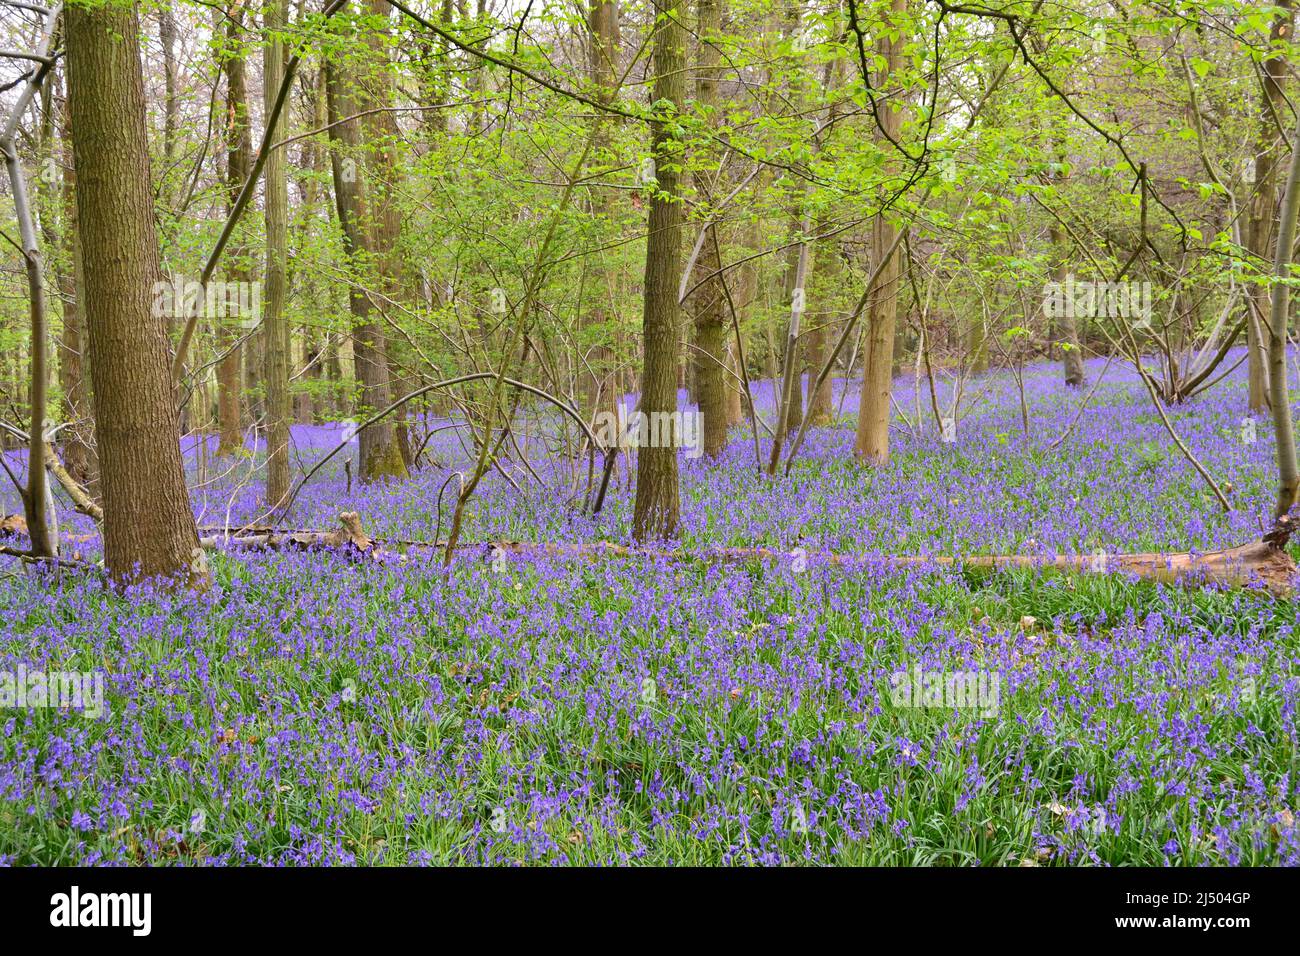 Meenfield woods in Shoreham woods, Darent Valley, Kent. Spectacular bluebells in North Downs beech woods in April near Bromley/Orpington. Stock Photo